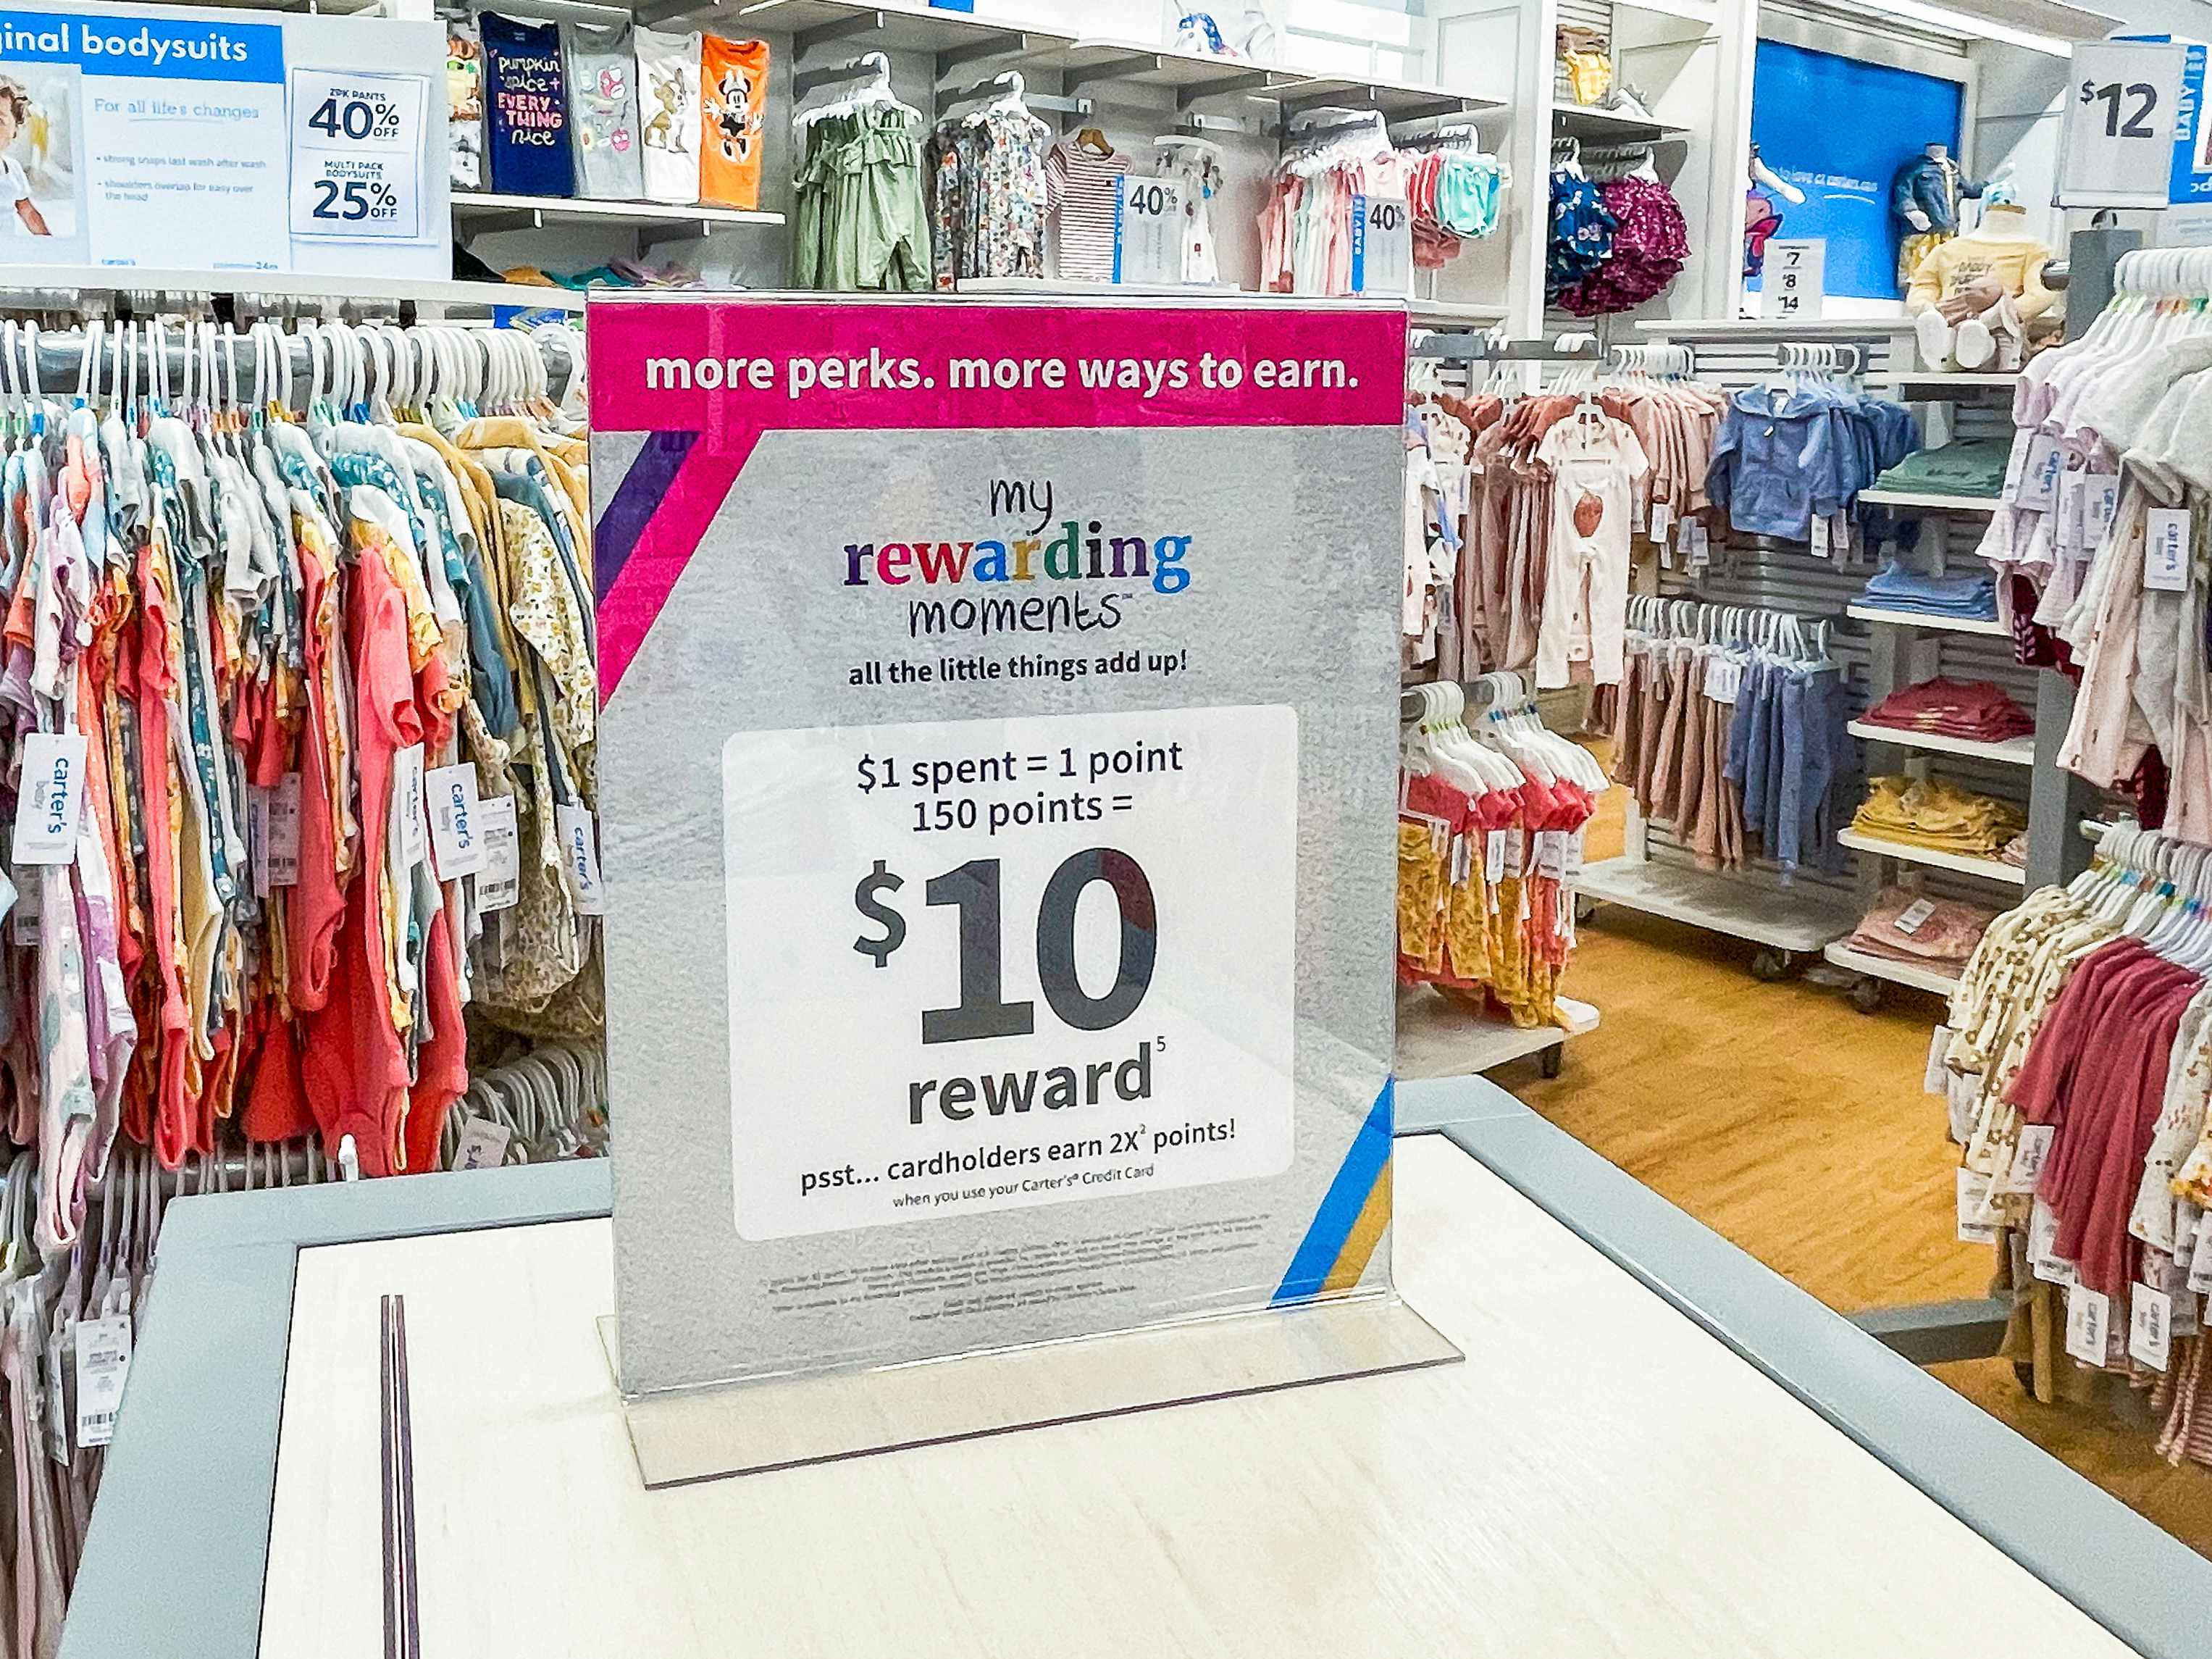 A sign for the Carter's My Rewarding Moments program advertising an offer of $10 for points earned through purchases.